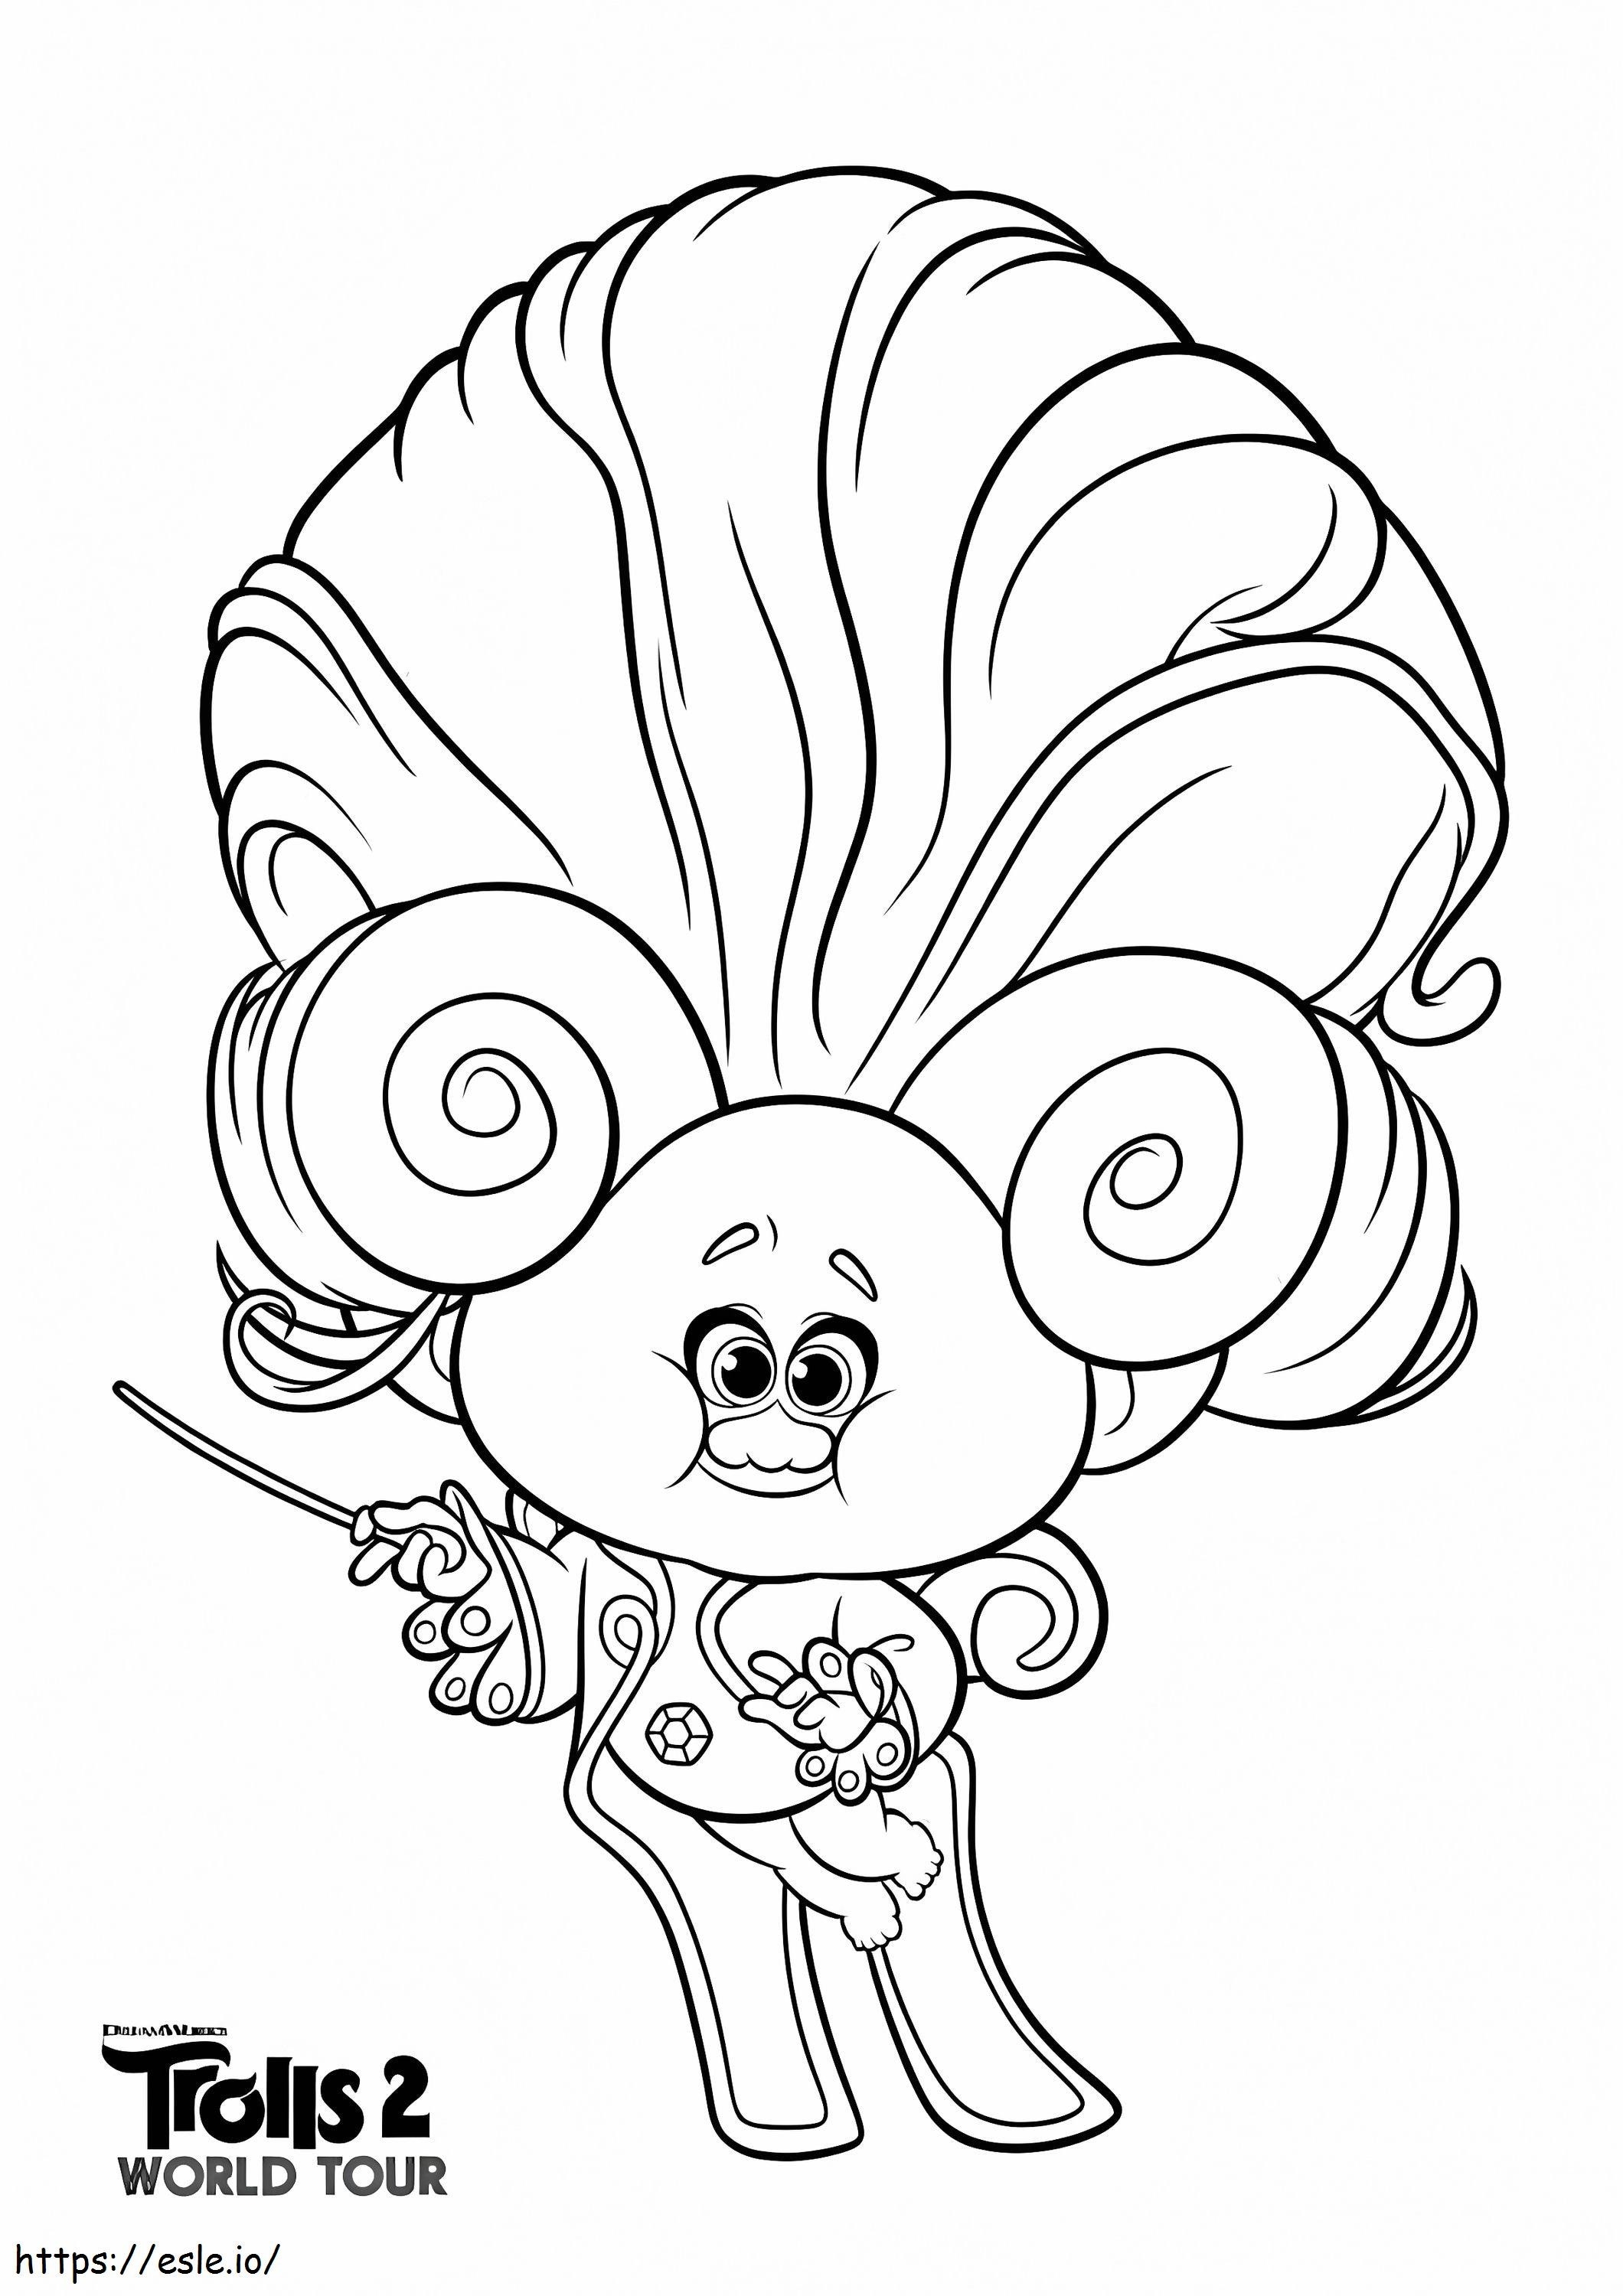 Wonder day trolls world tour coloring page